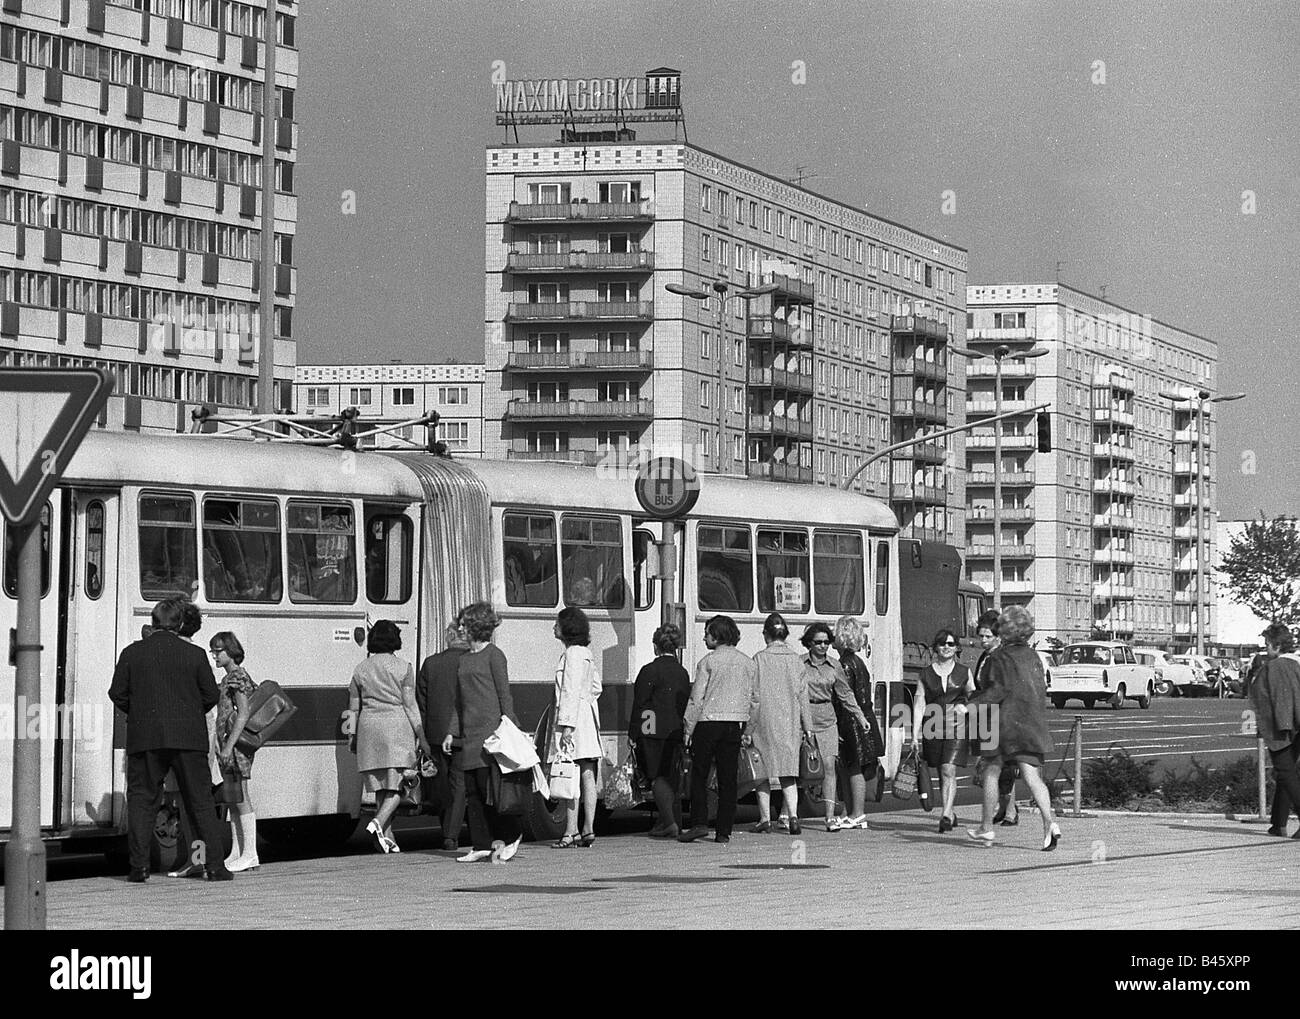 geography/travel, Germany, German Demokratic Republic, transport/transportion, bus, line 16, bus stop, Karl-Marx-Allee, 1971, public transportation, passengers, people, GDR, East Berlin, 20th century, historic, historical,Karl Marx Allee, 1970s, Stock Photo